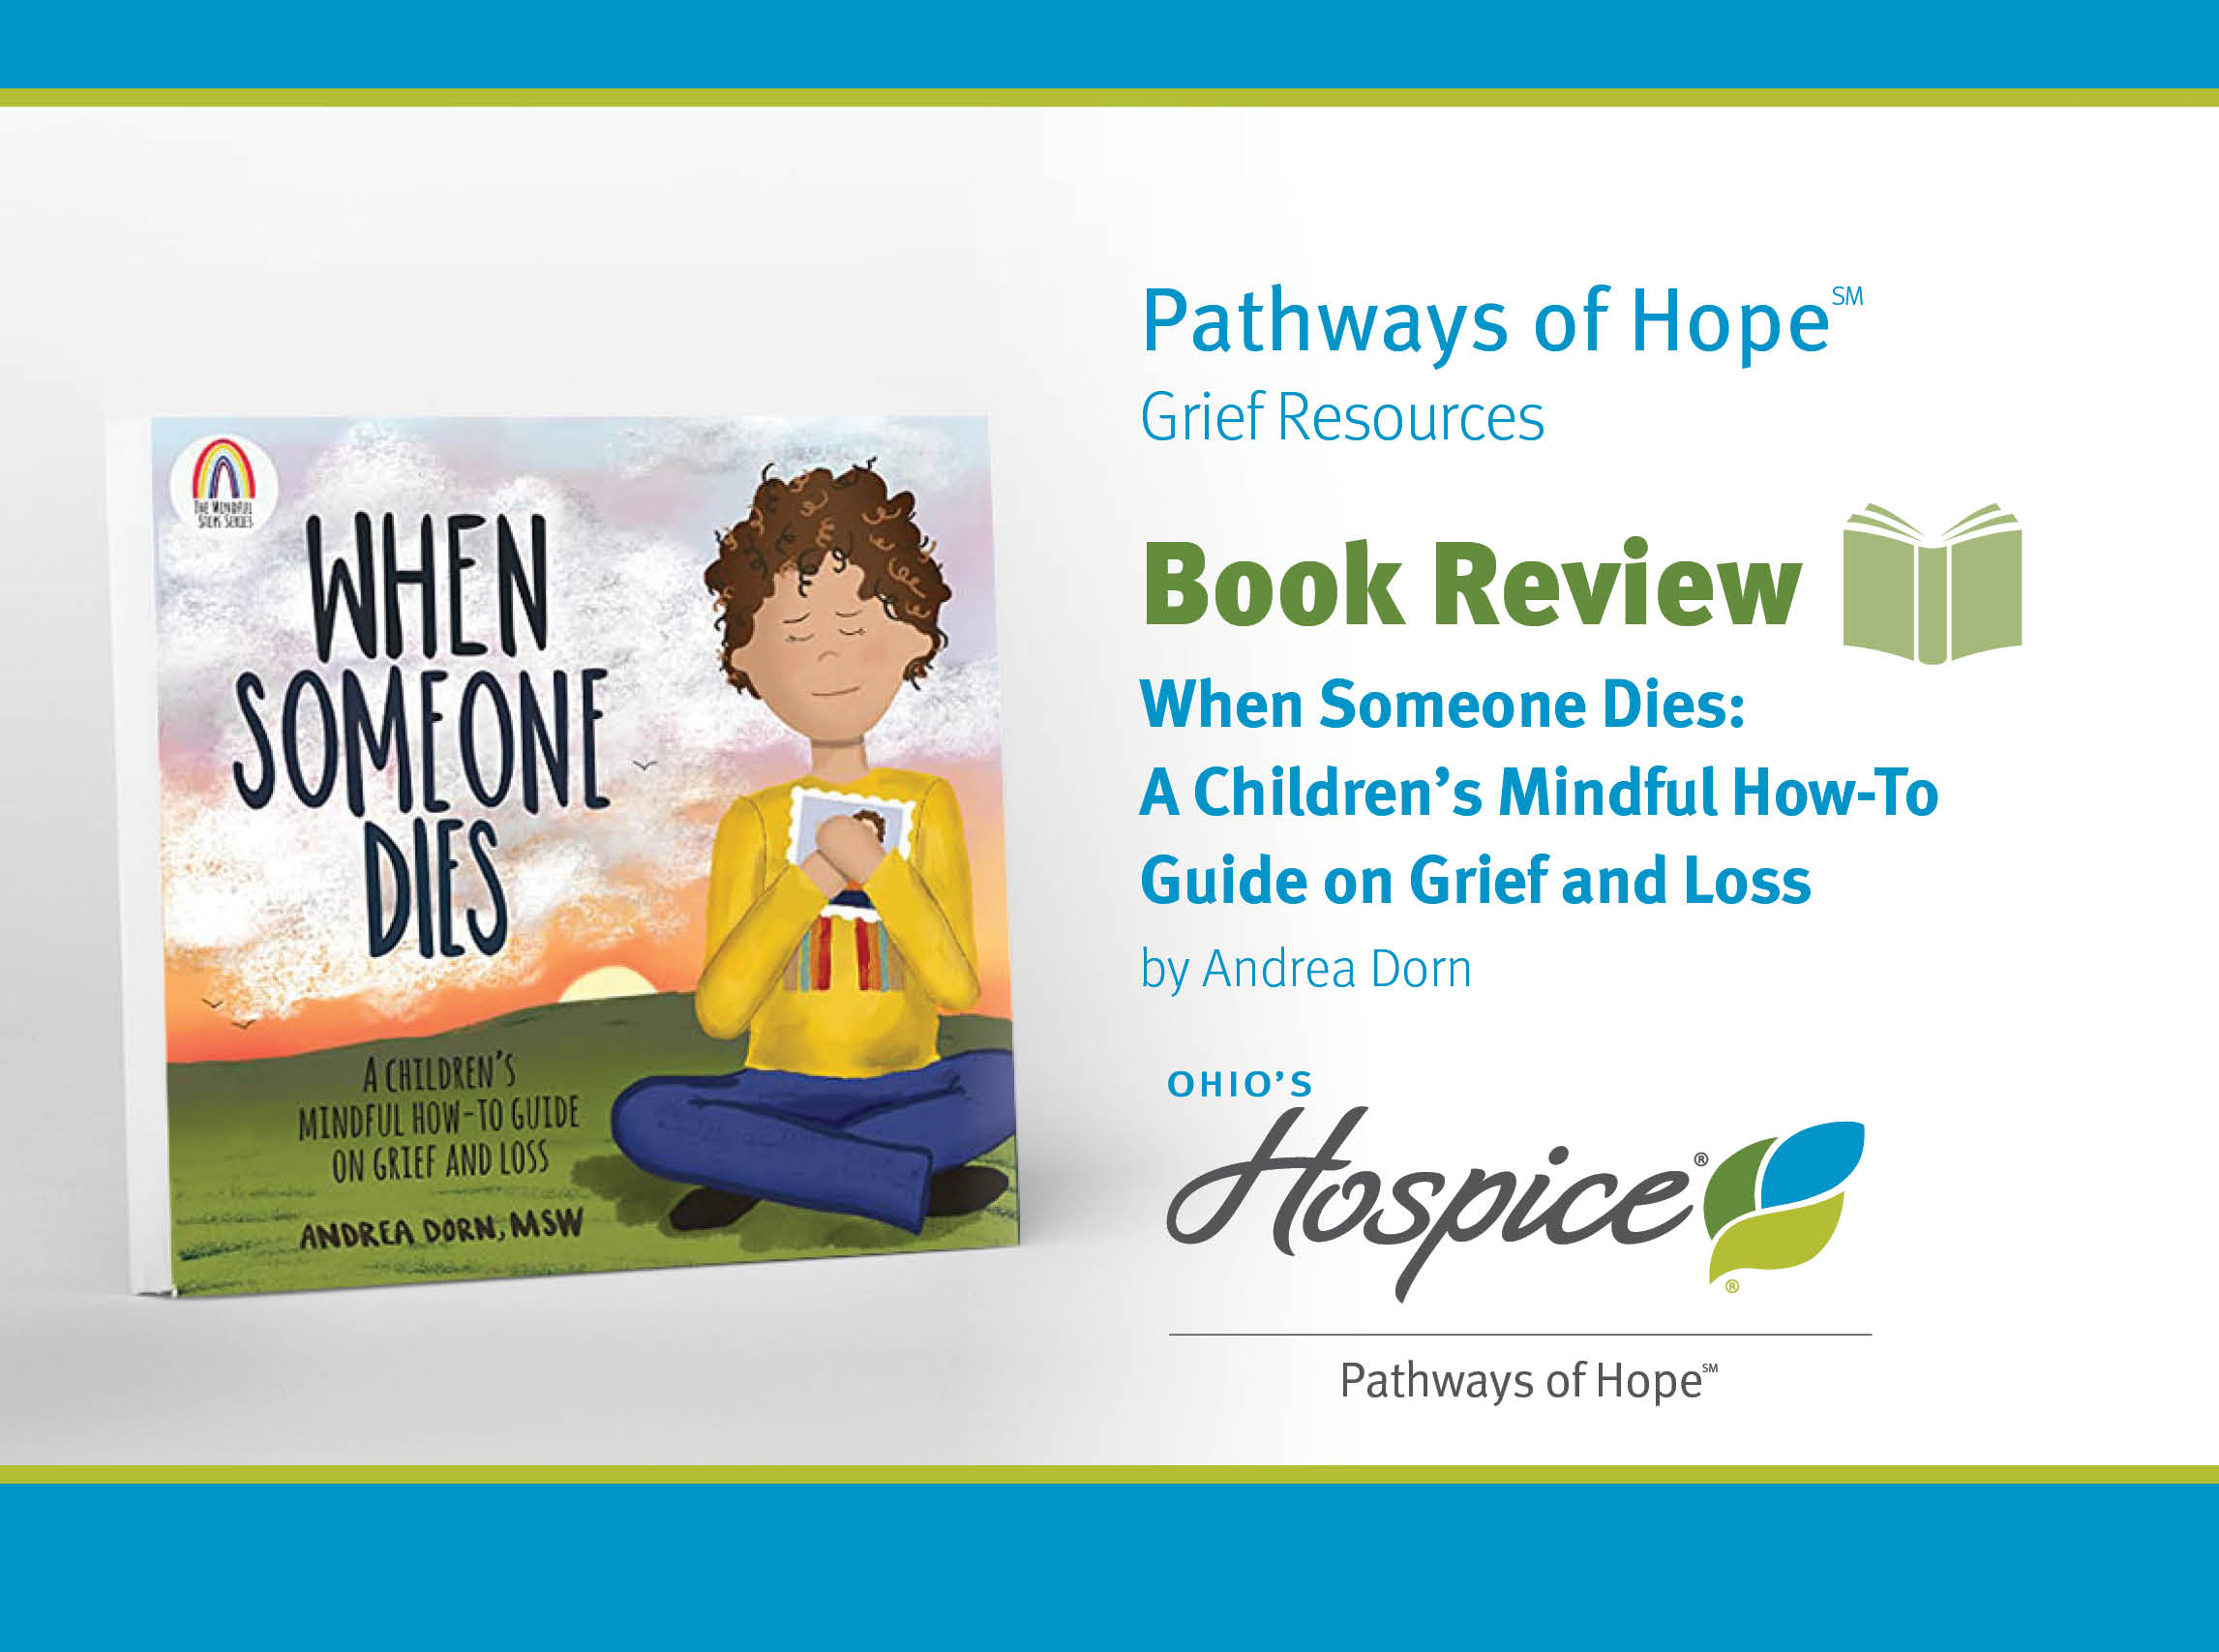 Pathways of Hope Grief Resources. Book Review.